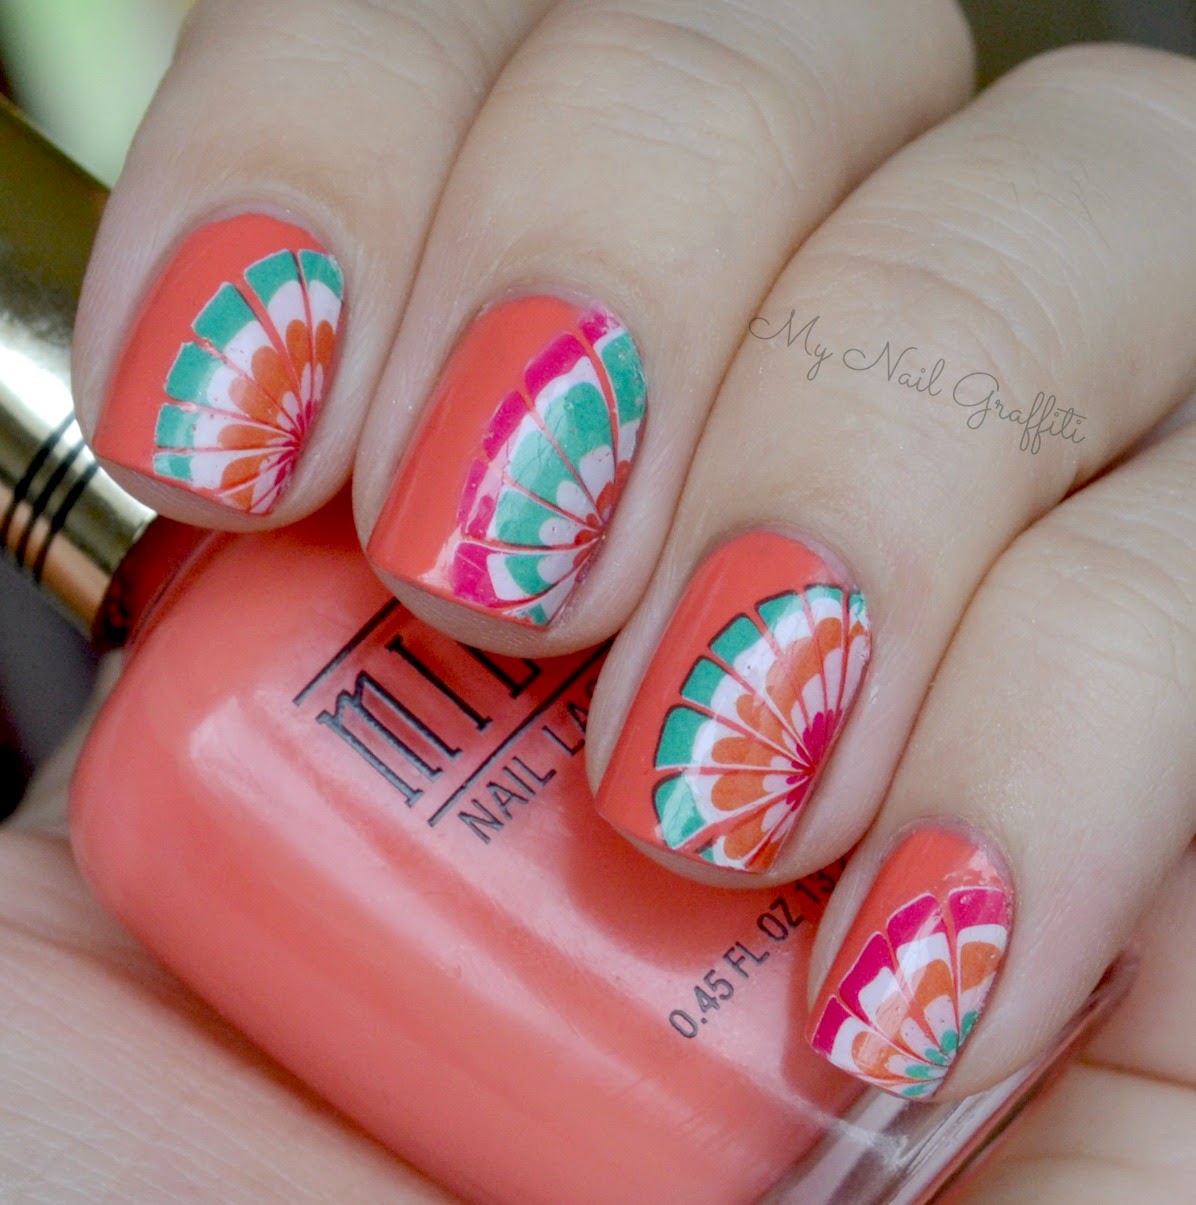 My Nail Graffiti: Water Marble Water Decals